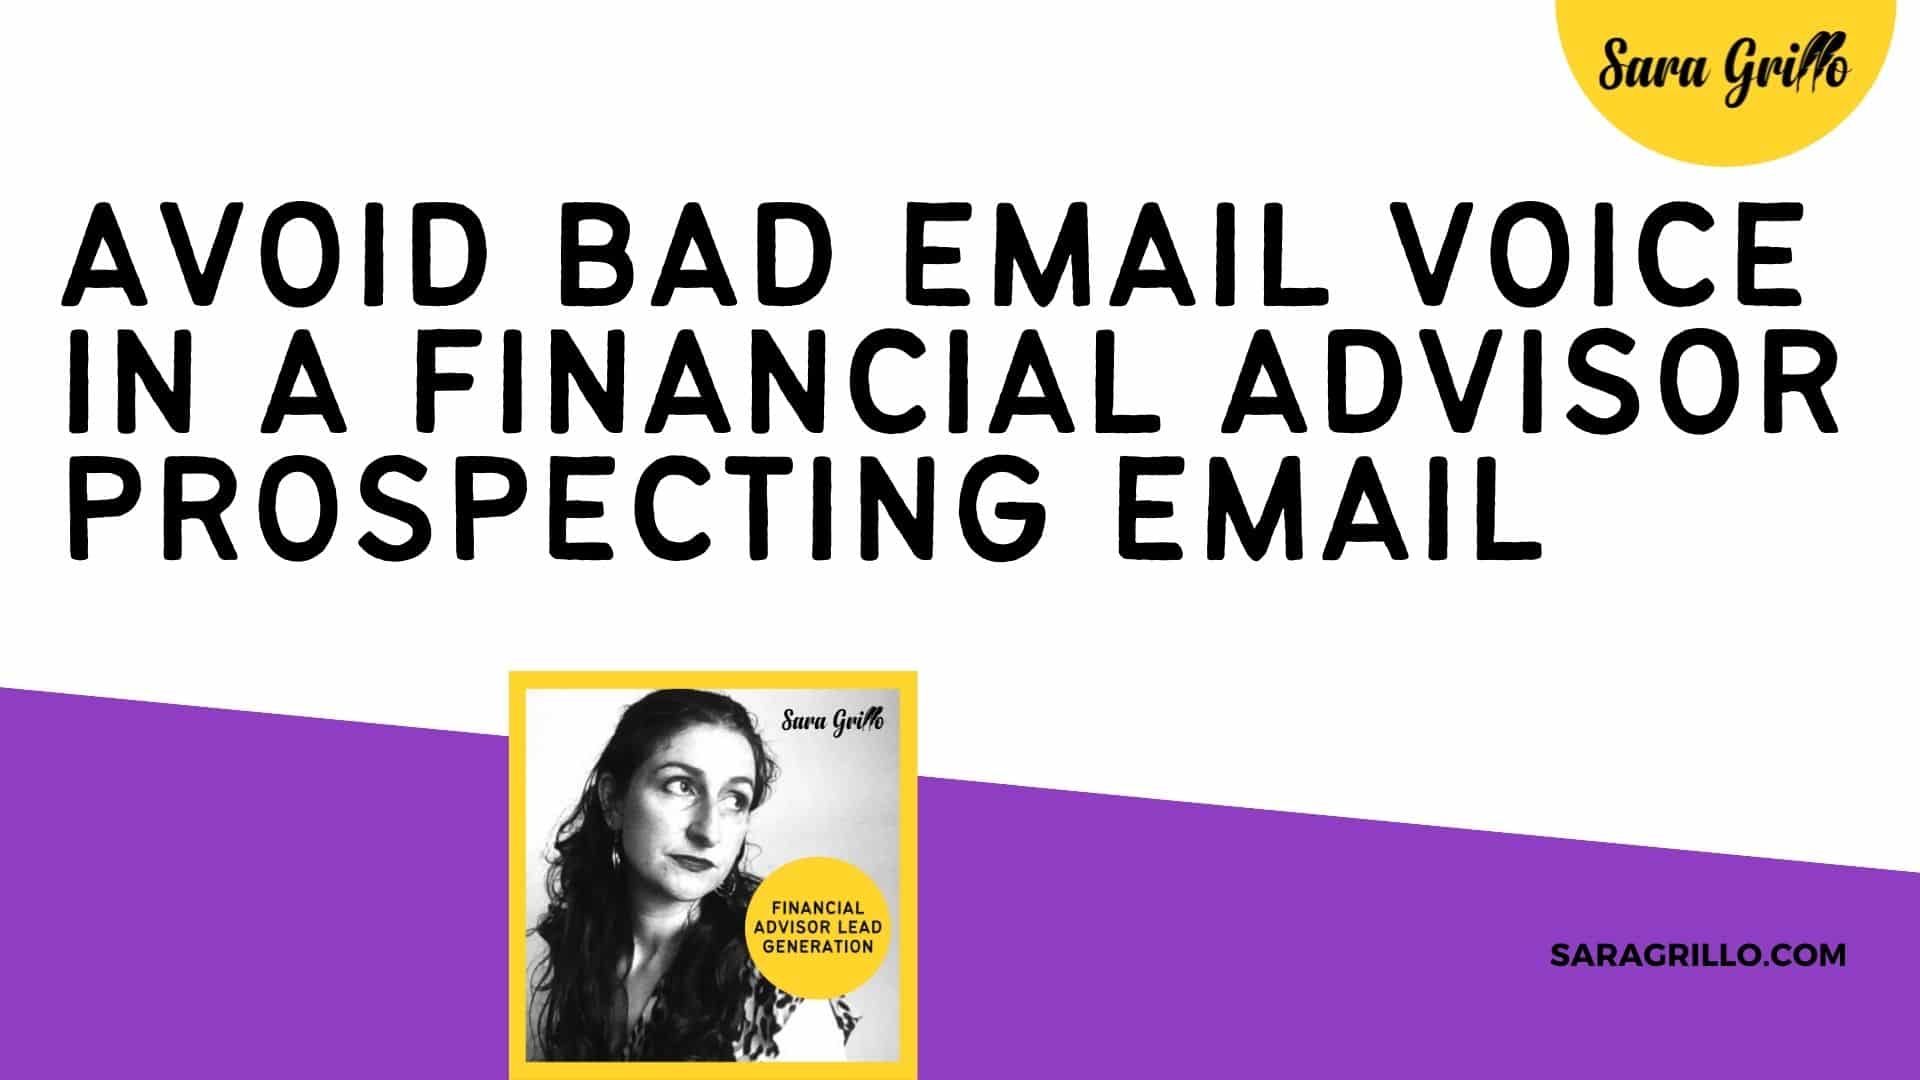 In this blog we talk about how to avoid having a bad email voice in a financial advisor prospecting email.